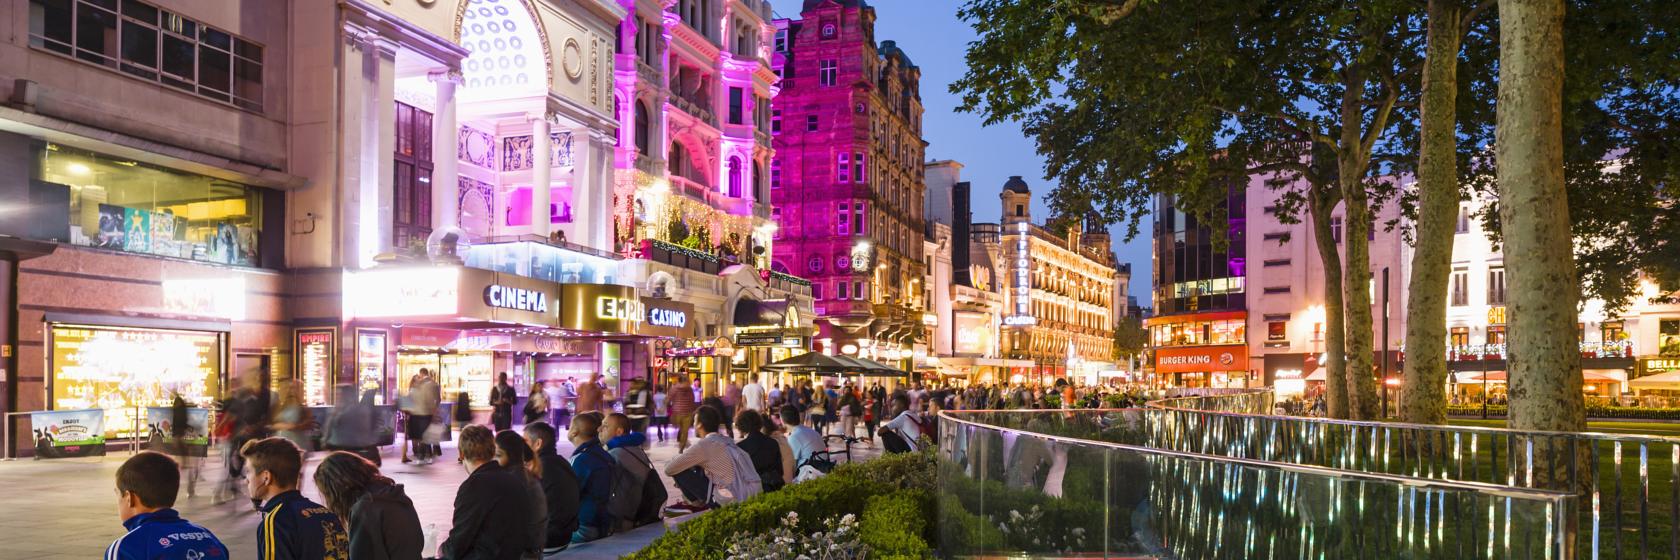 Leicester Square, London Hotels